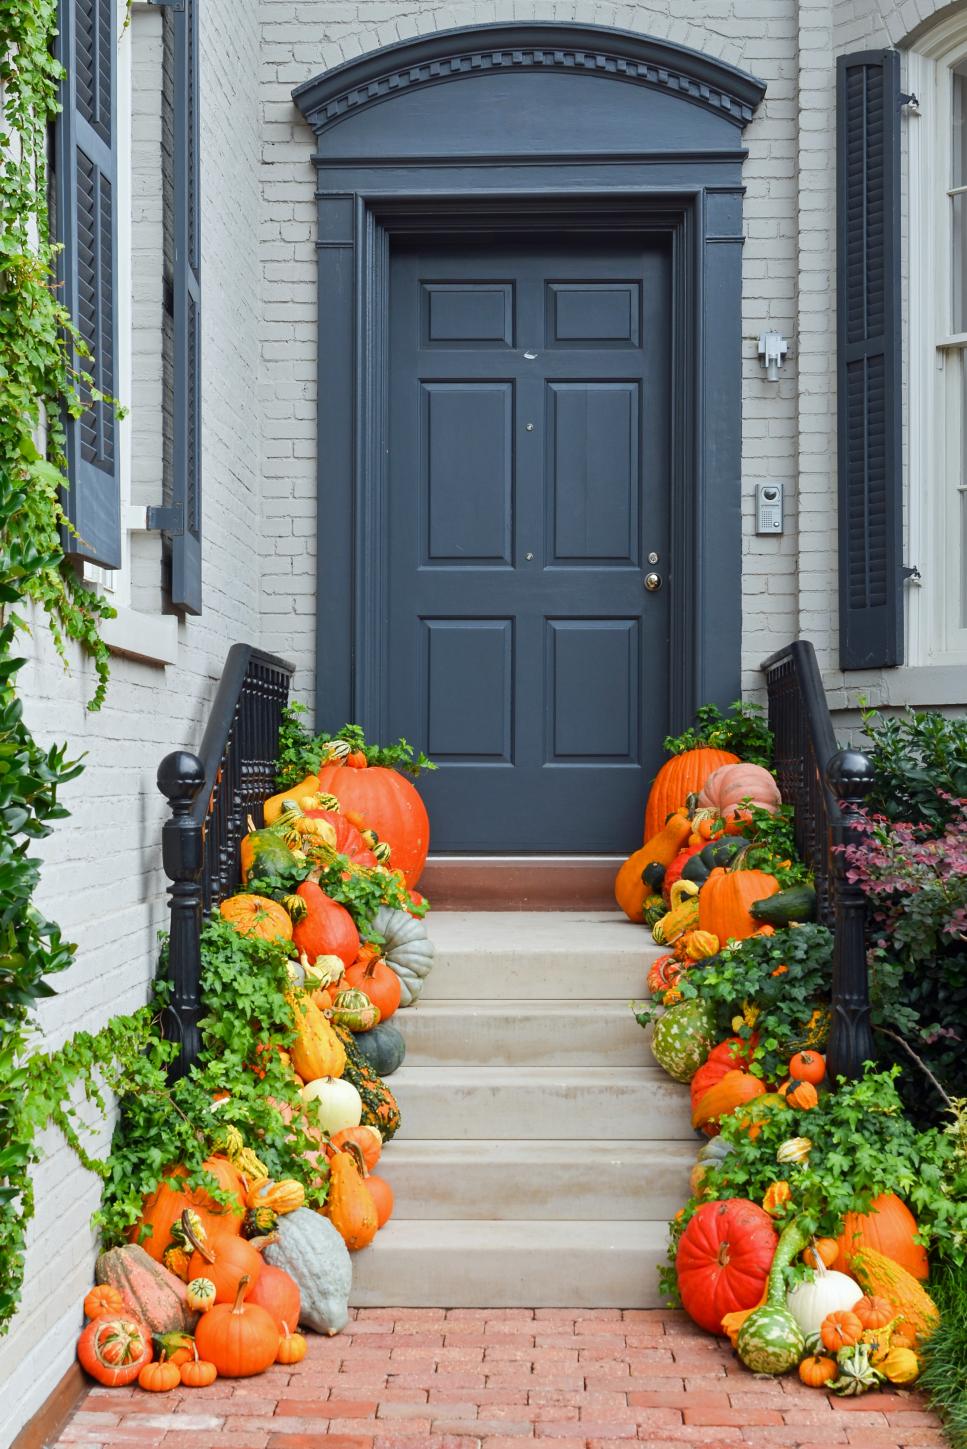 10 Easy Essentials for Outdoor Fall Decorating -   DIY Fall Front Porch Decorating Ideas